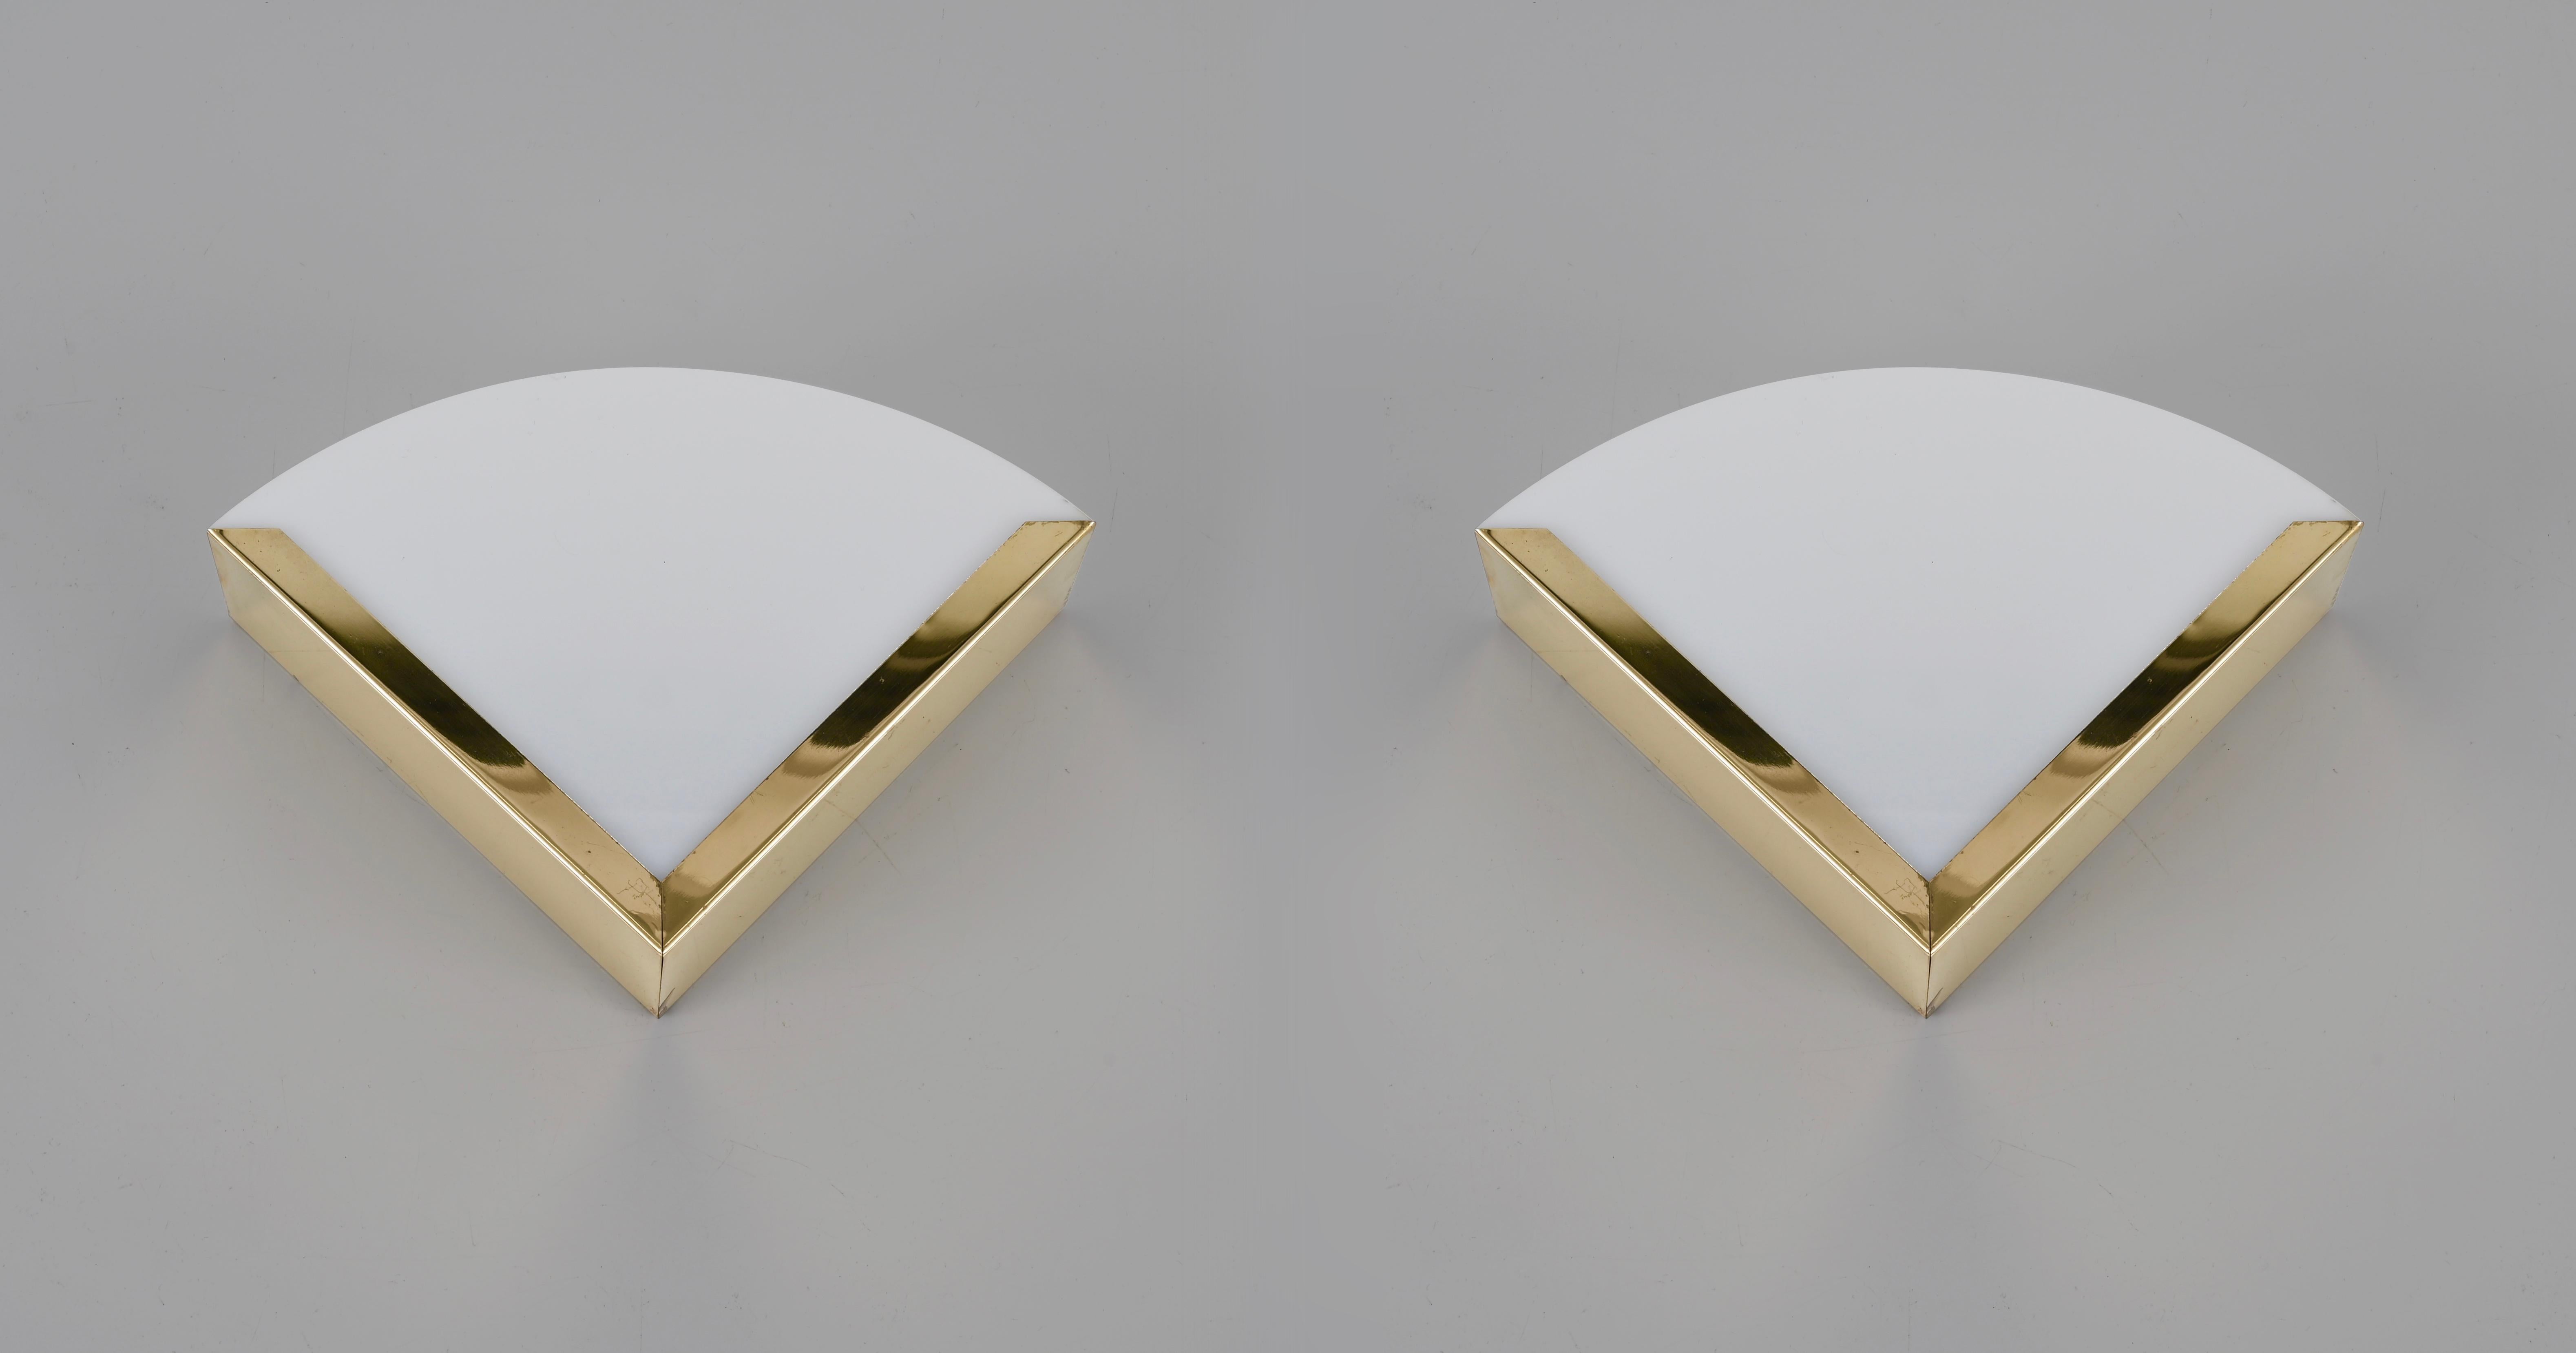 Italian Triangular Sconces in Brass and White Perspex, Italy 1970s For Sale 2